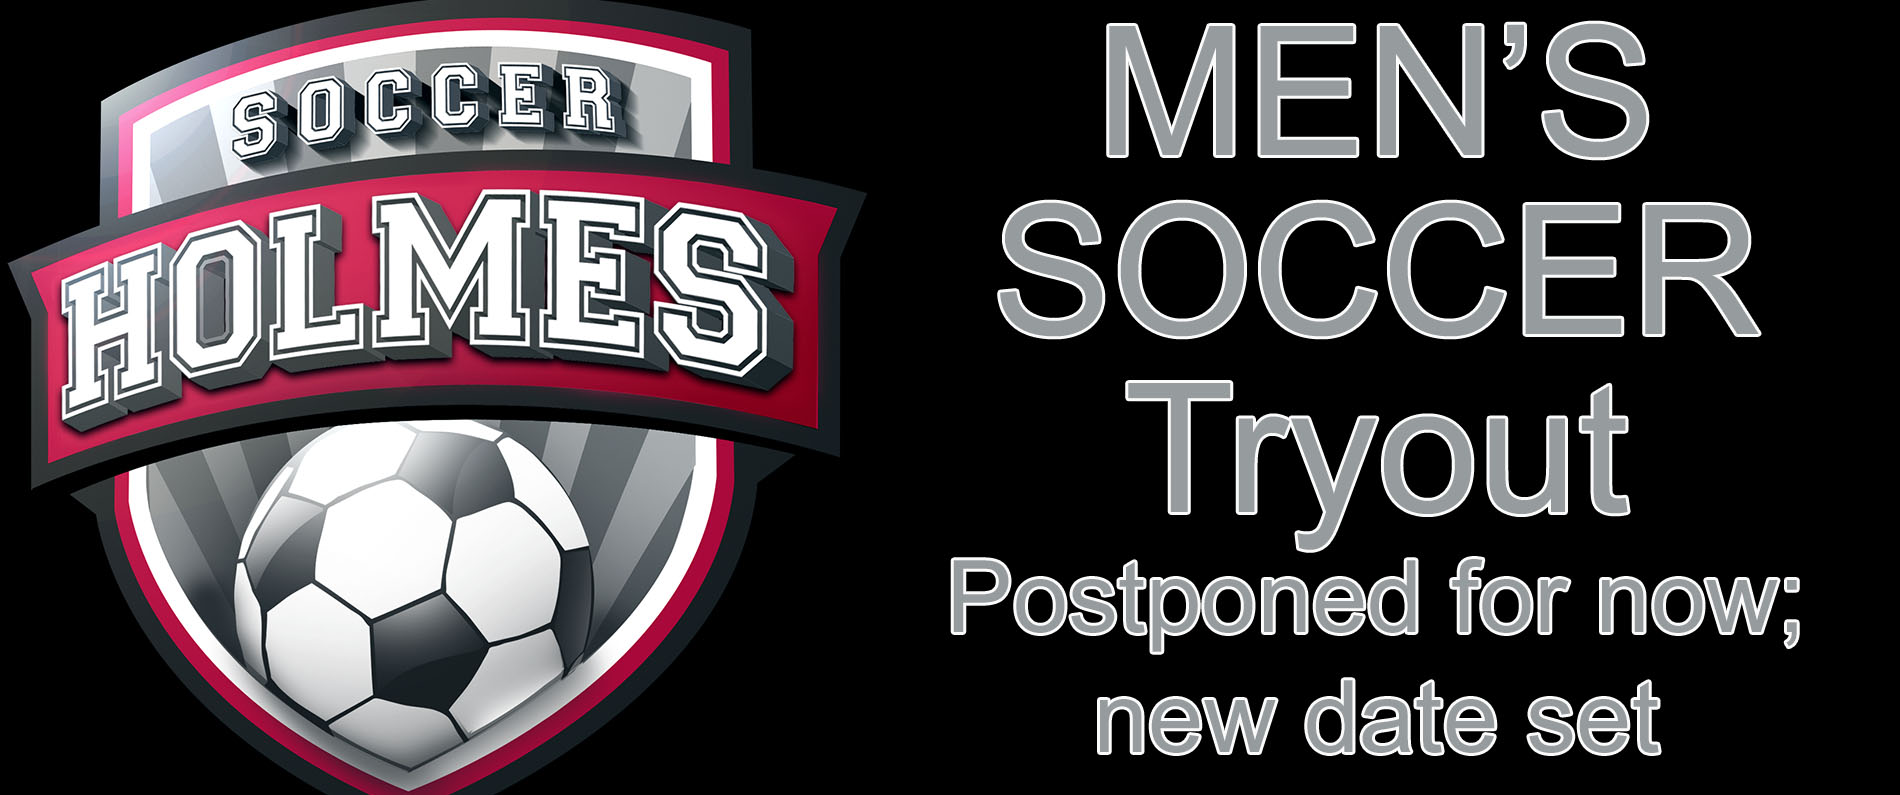 March 19 tryout has been postponed; new date no available